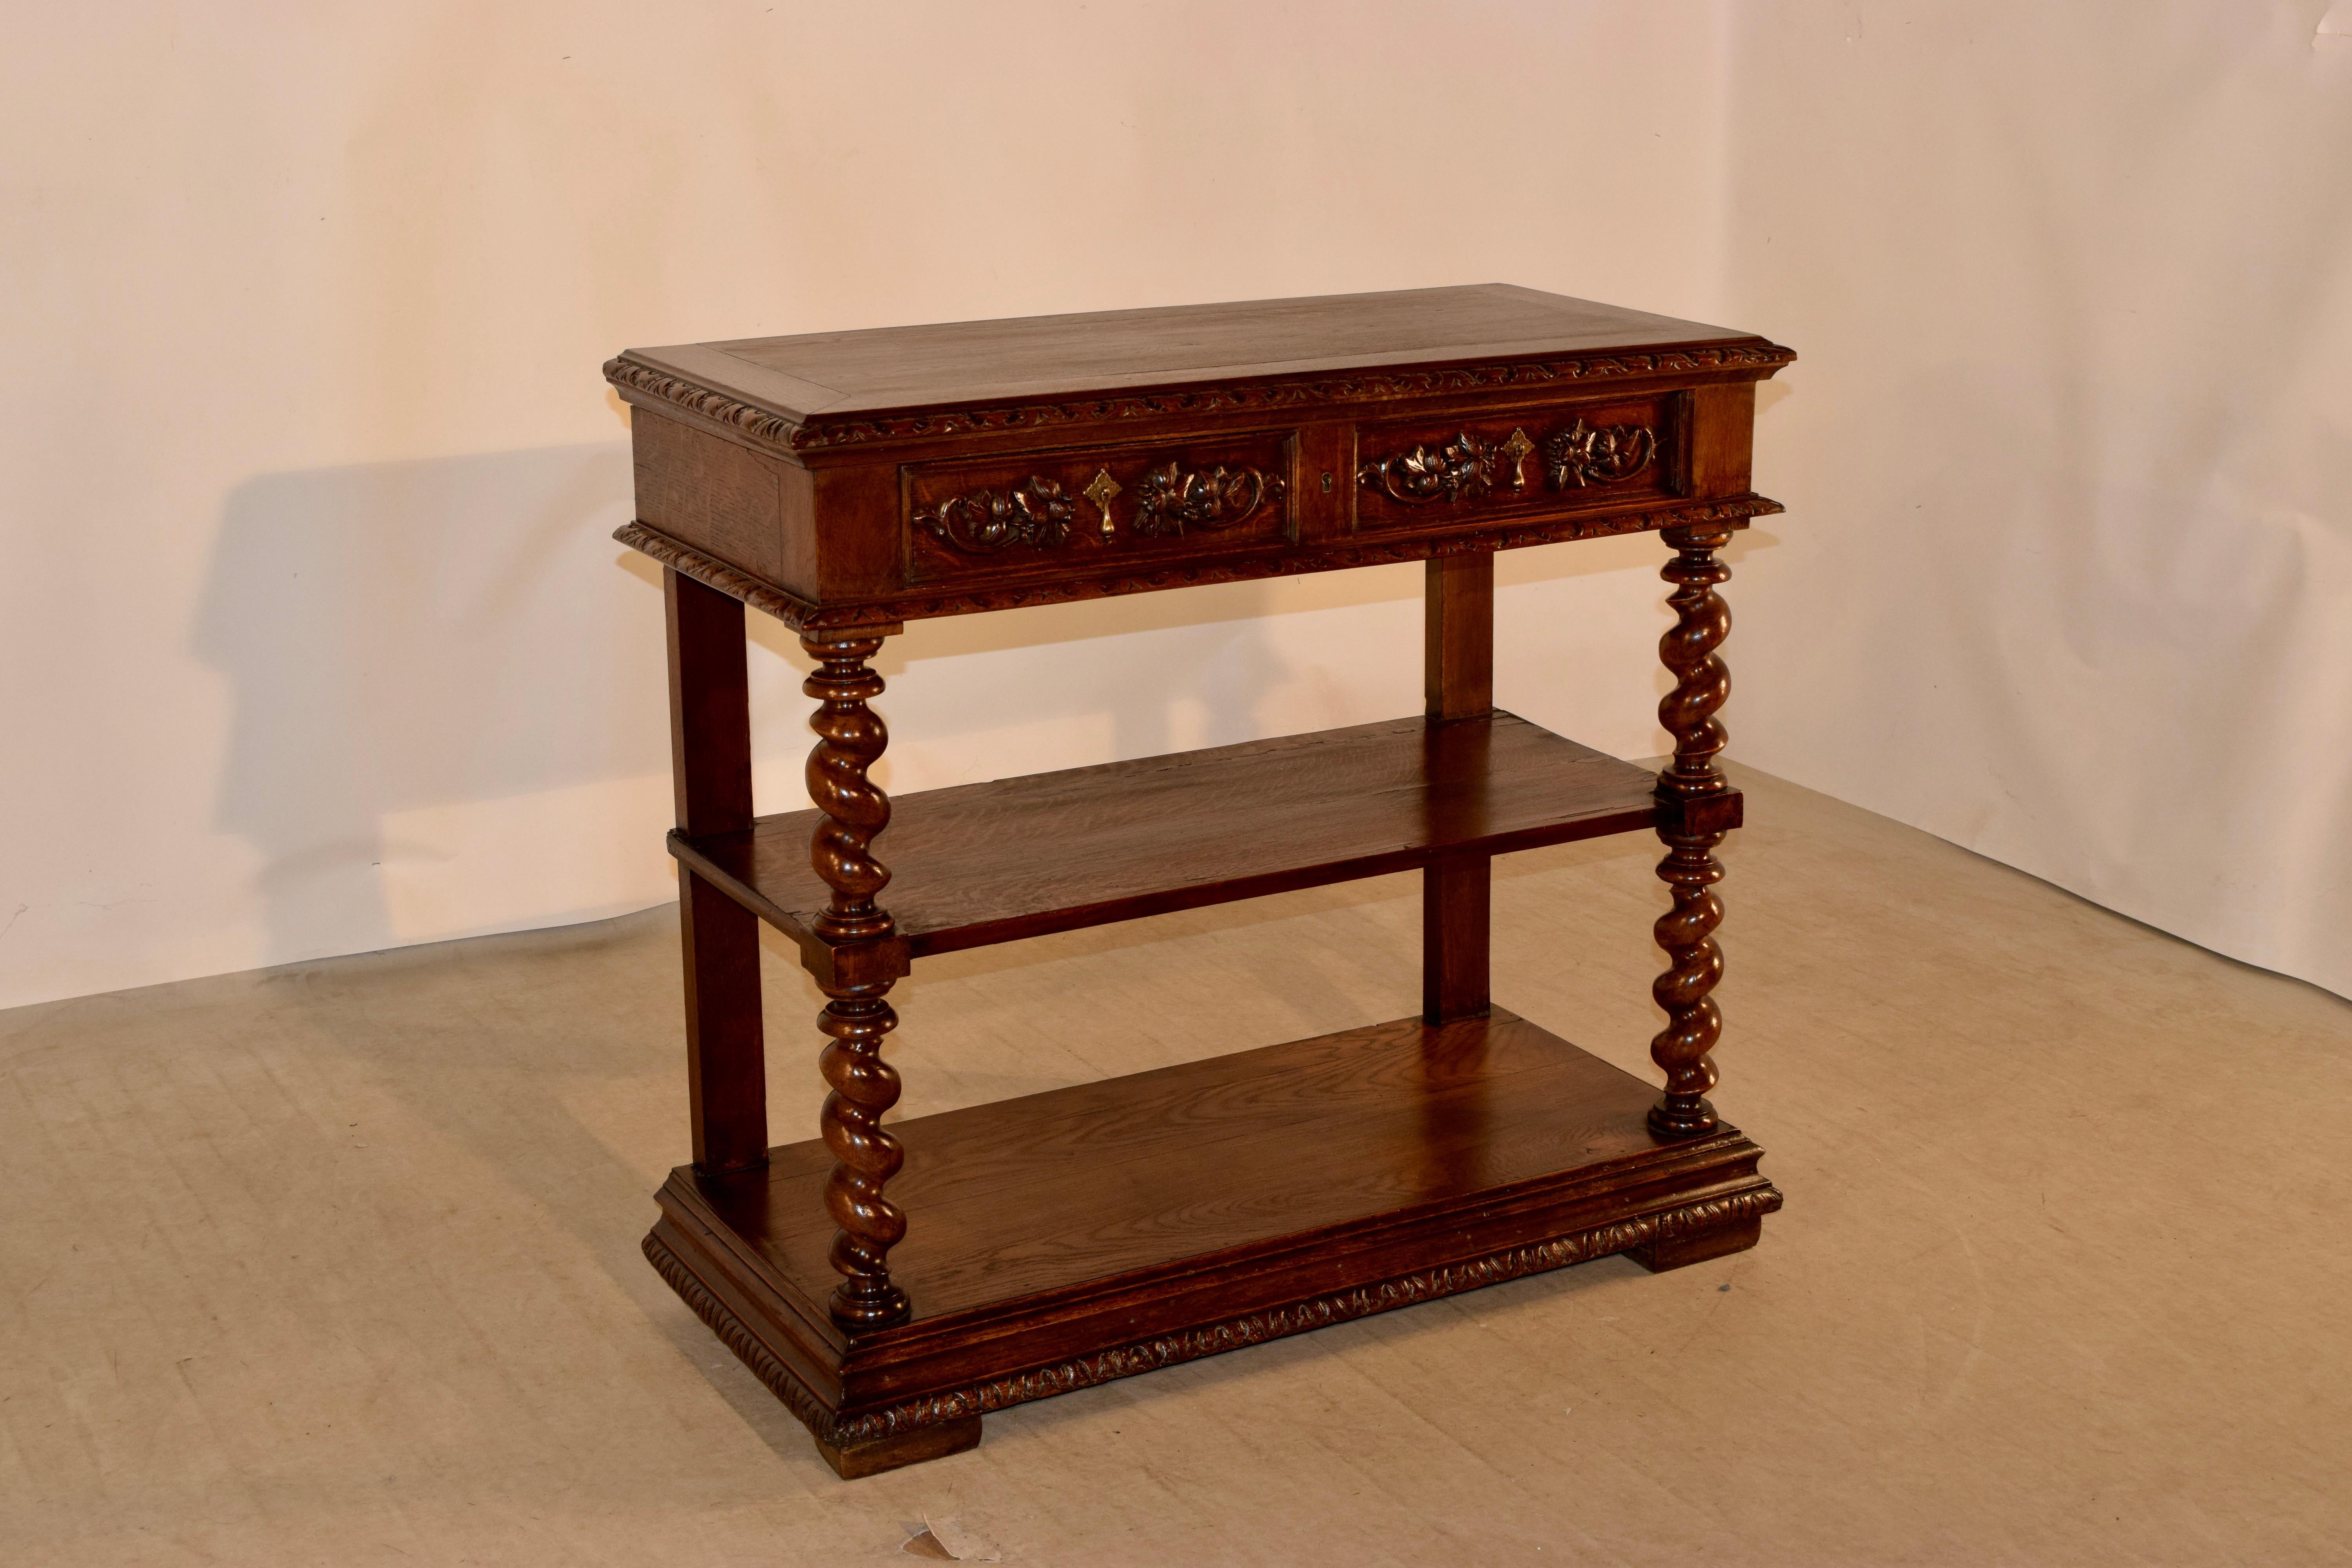 19th century French dessert buffet made from oak with a banded top which has a beveled and carved decorated edge, following down to two drawers, both with molded edges and hand carved decorations. The piece has two shelves, separated by hand turned